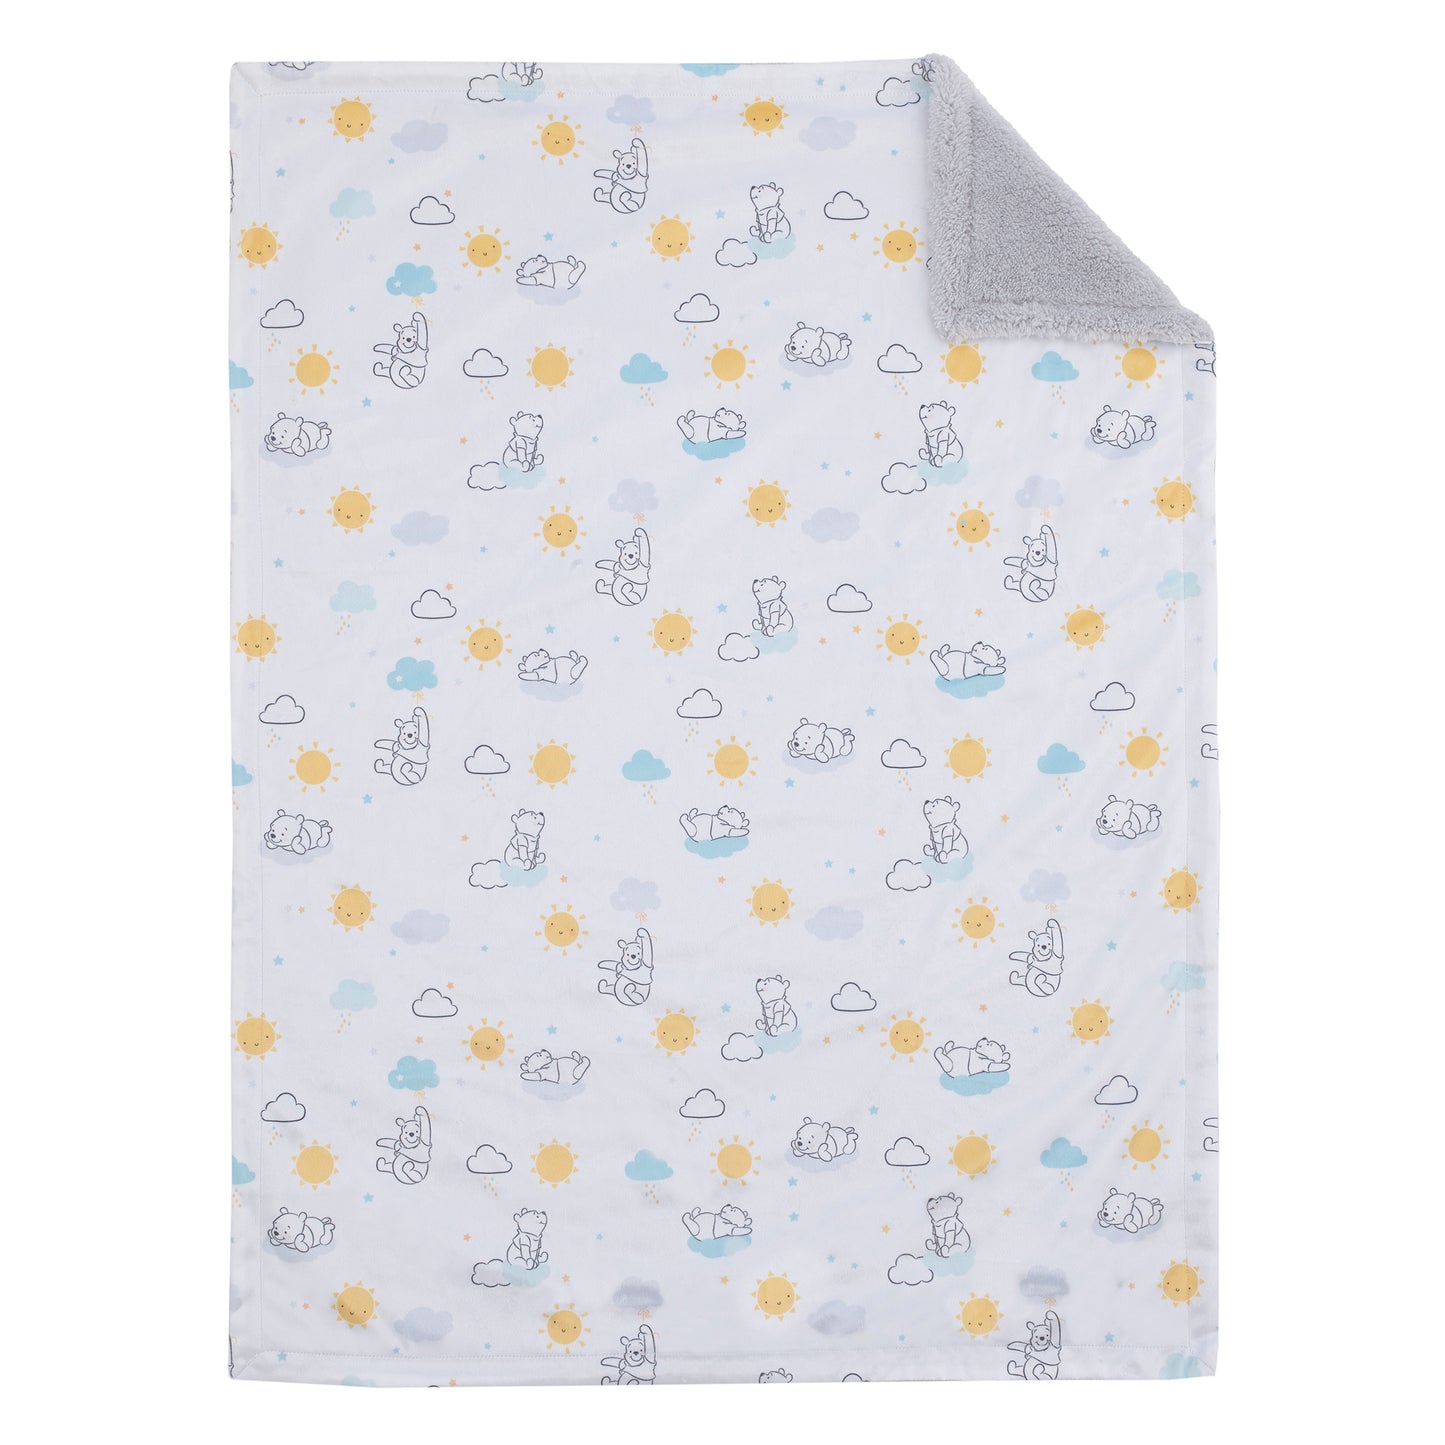 Disney Winnie the Pooh White, Yellow, and Aqua Sunshine and Clouds Super Soft Velboa with Sherpa Back Baby Blanket